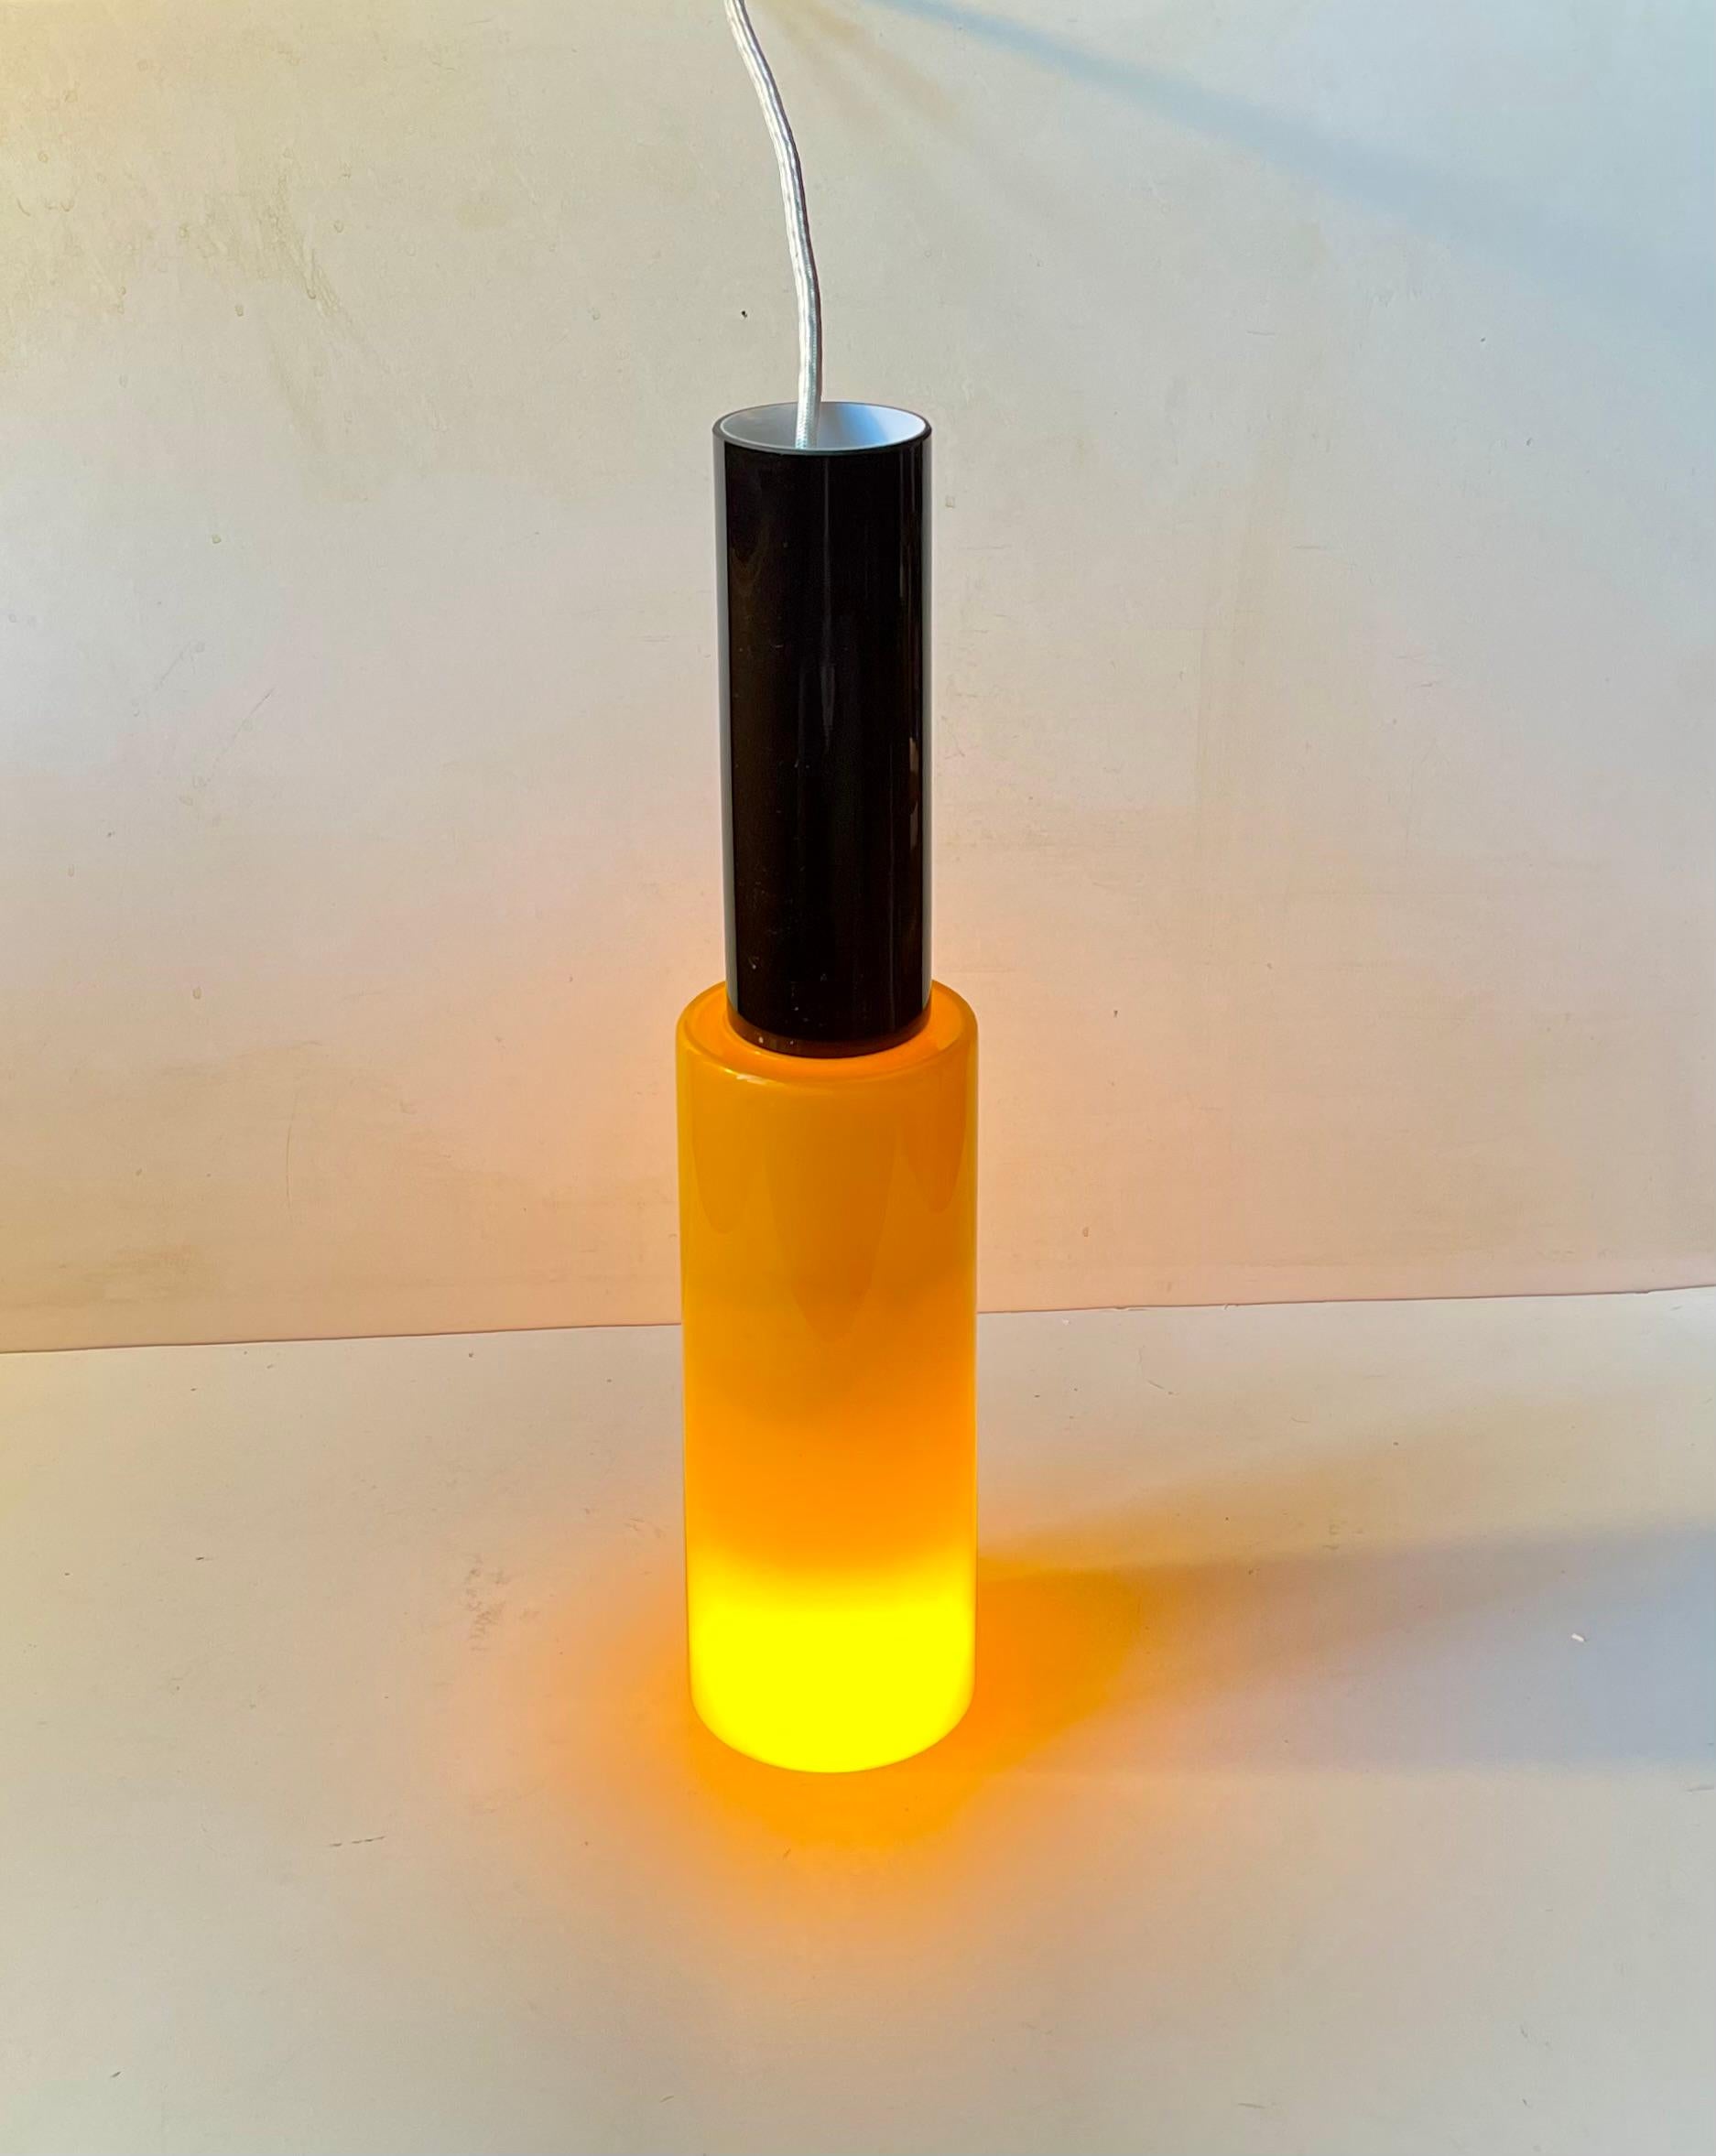 A tall mallet shaped hanging light featuring a cylindrical hand-blown yellow and black glass. Made anonymously in Italy during the 1980s. Measurements: H: 40 cm, Diameter: 10/6 cm (base/top). It comes installed with 3 meters new white cord and new